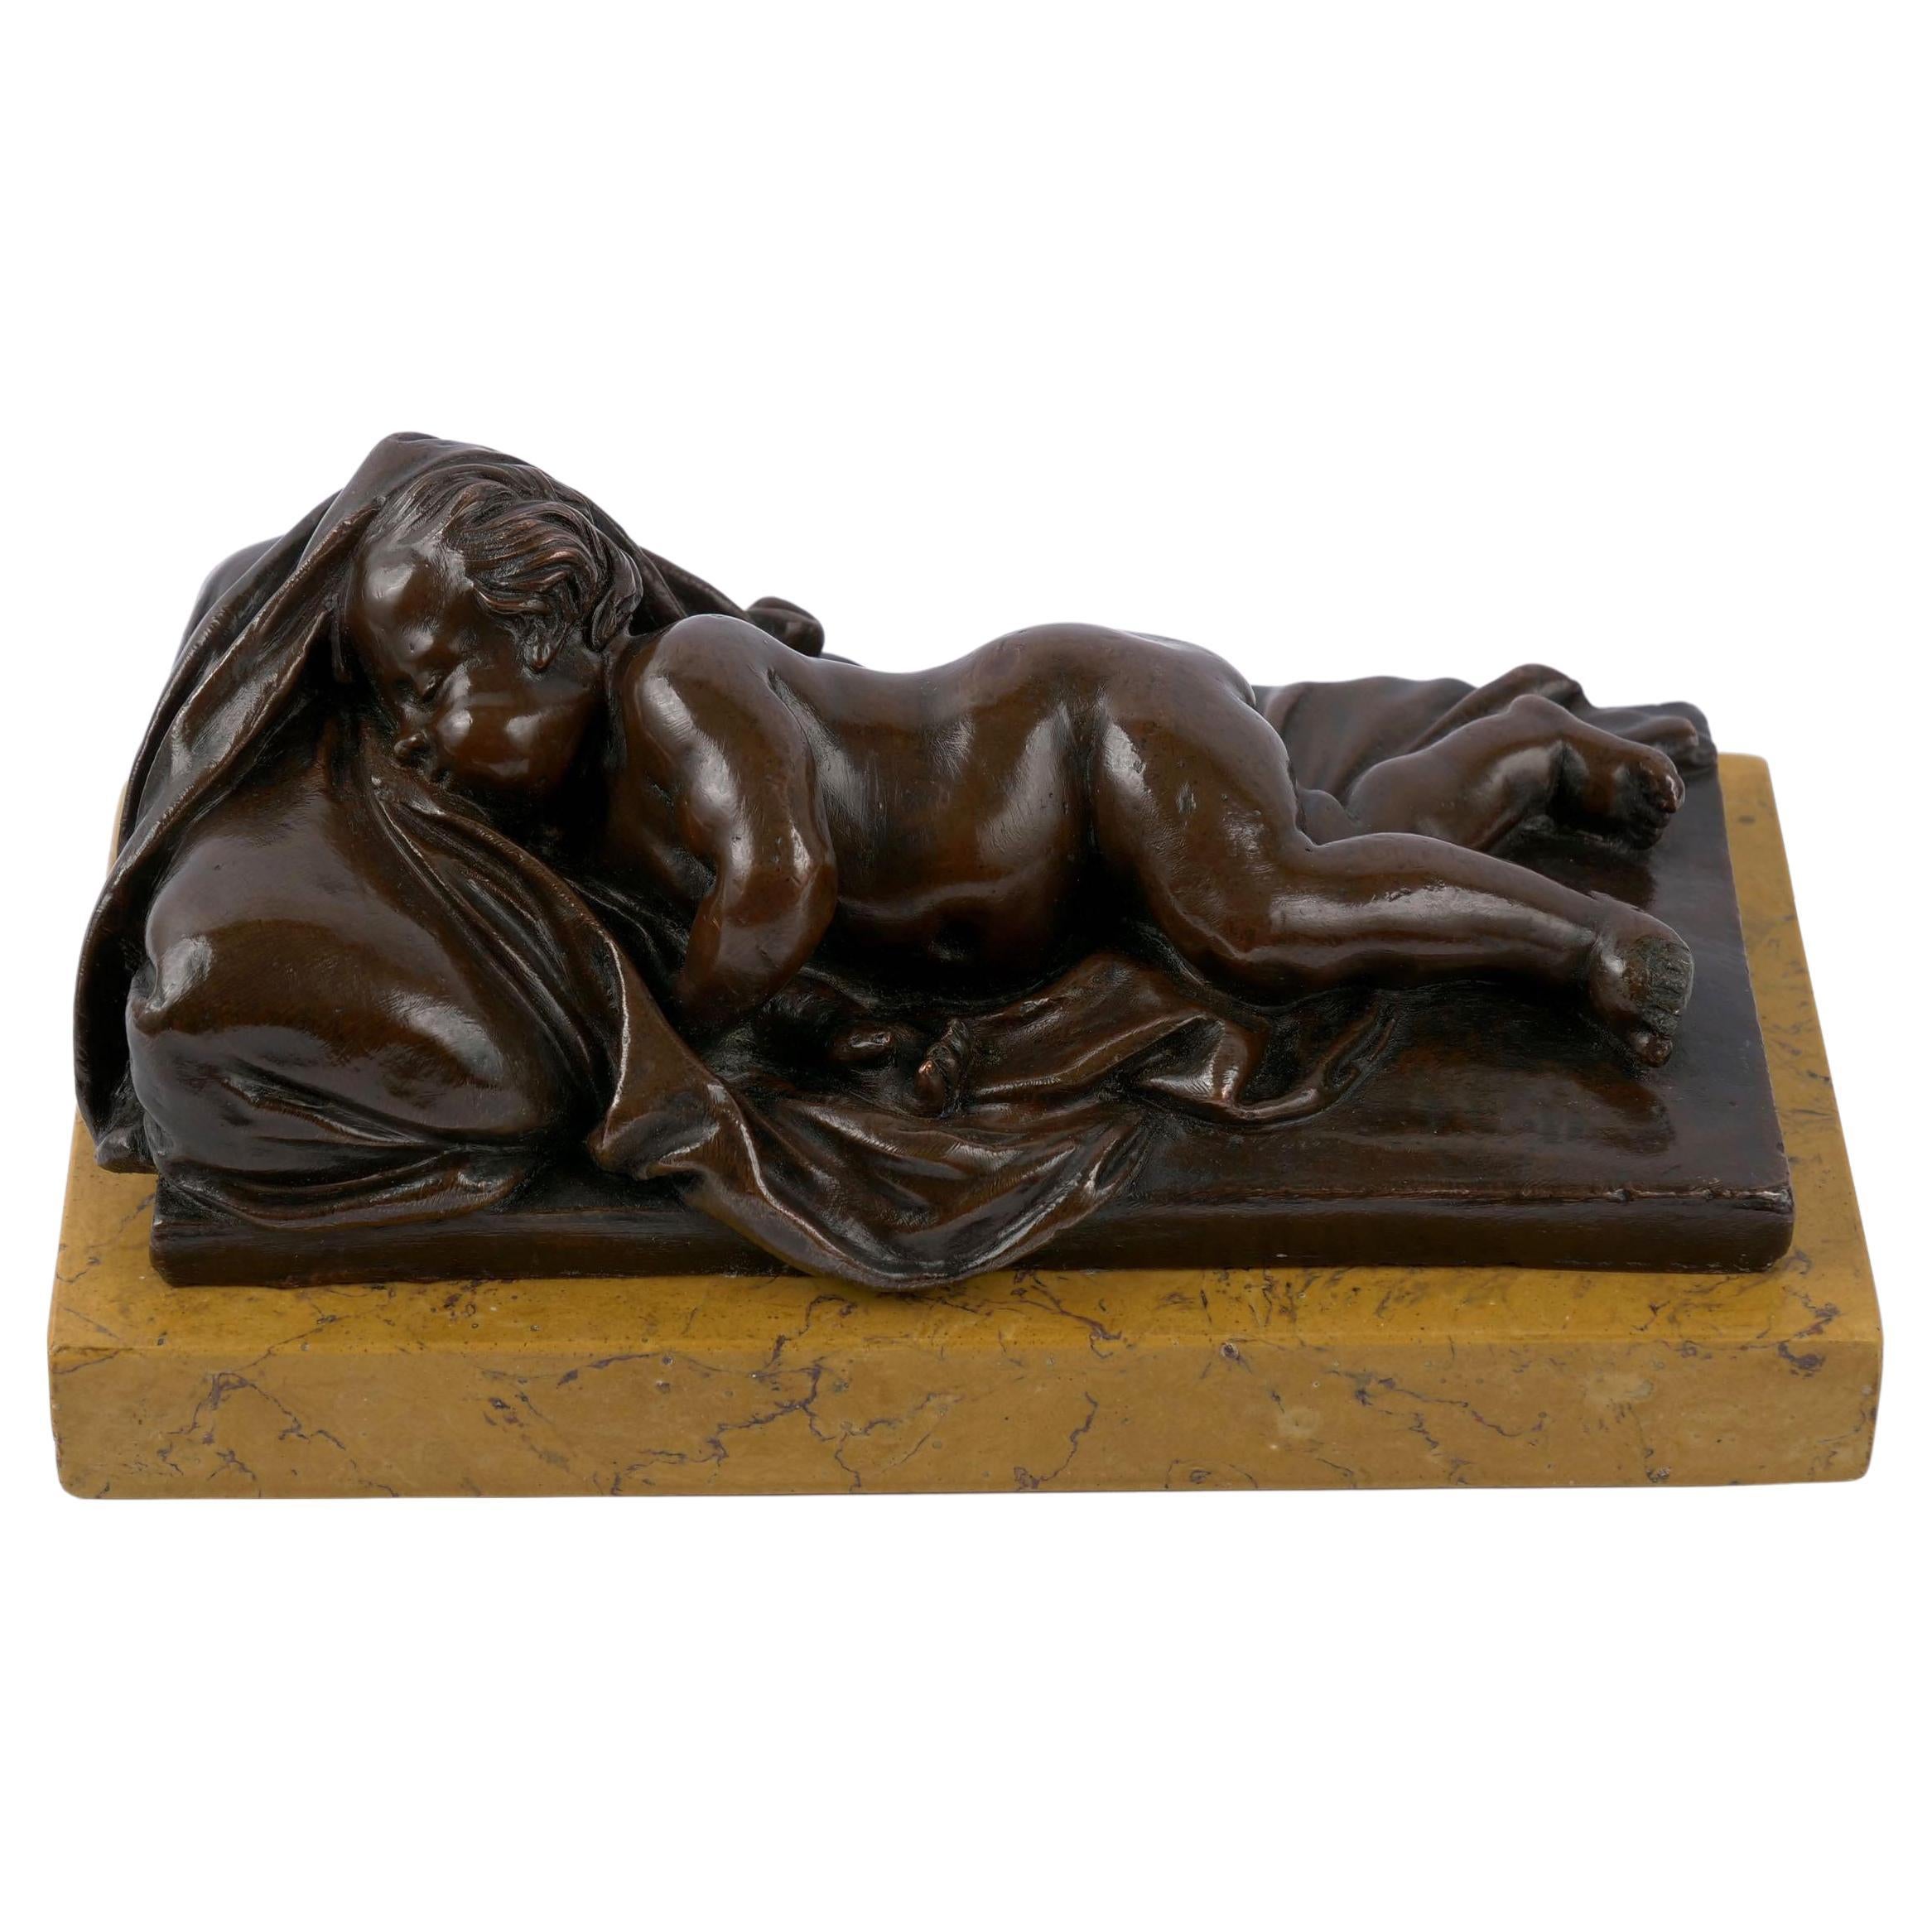 Antique Paperweight Sculpture of “Sleeping Putto” After François Duquesnoy For Sale